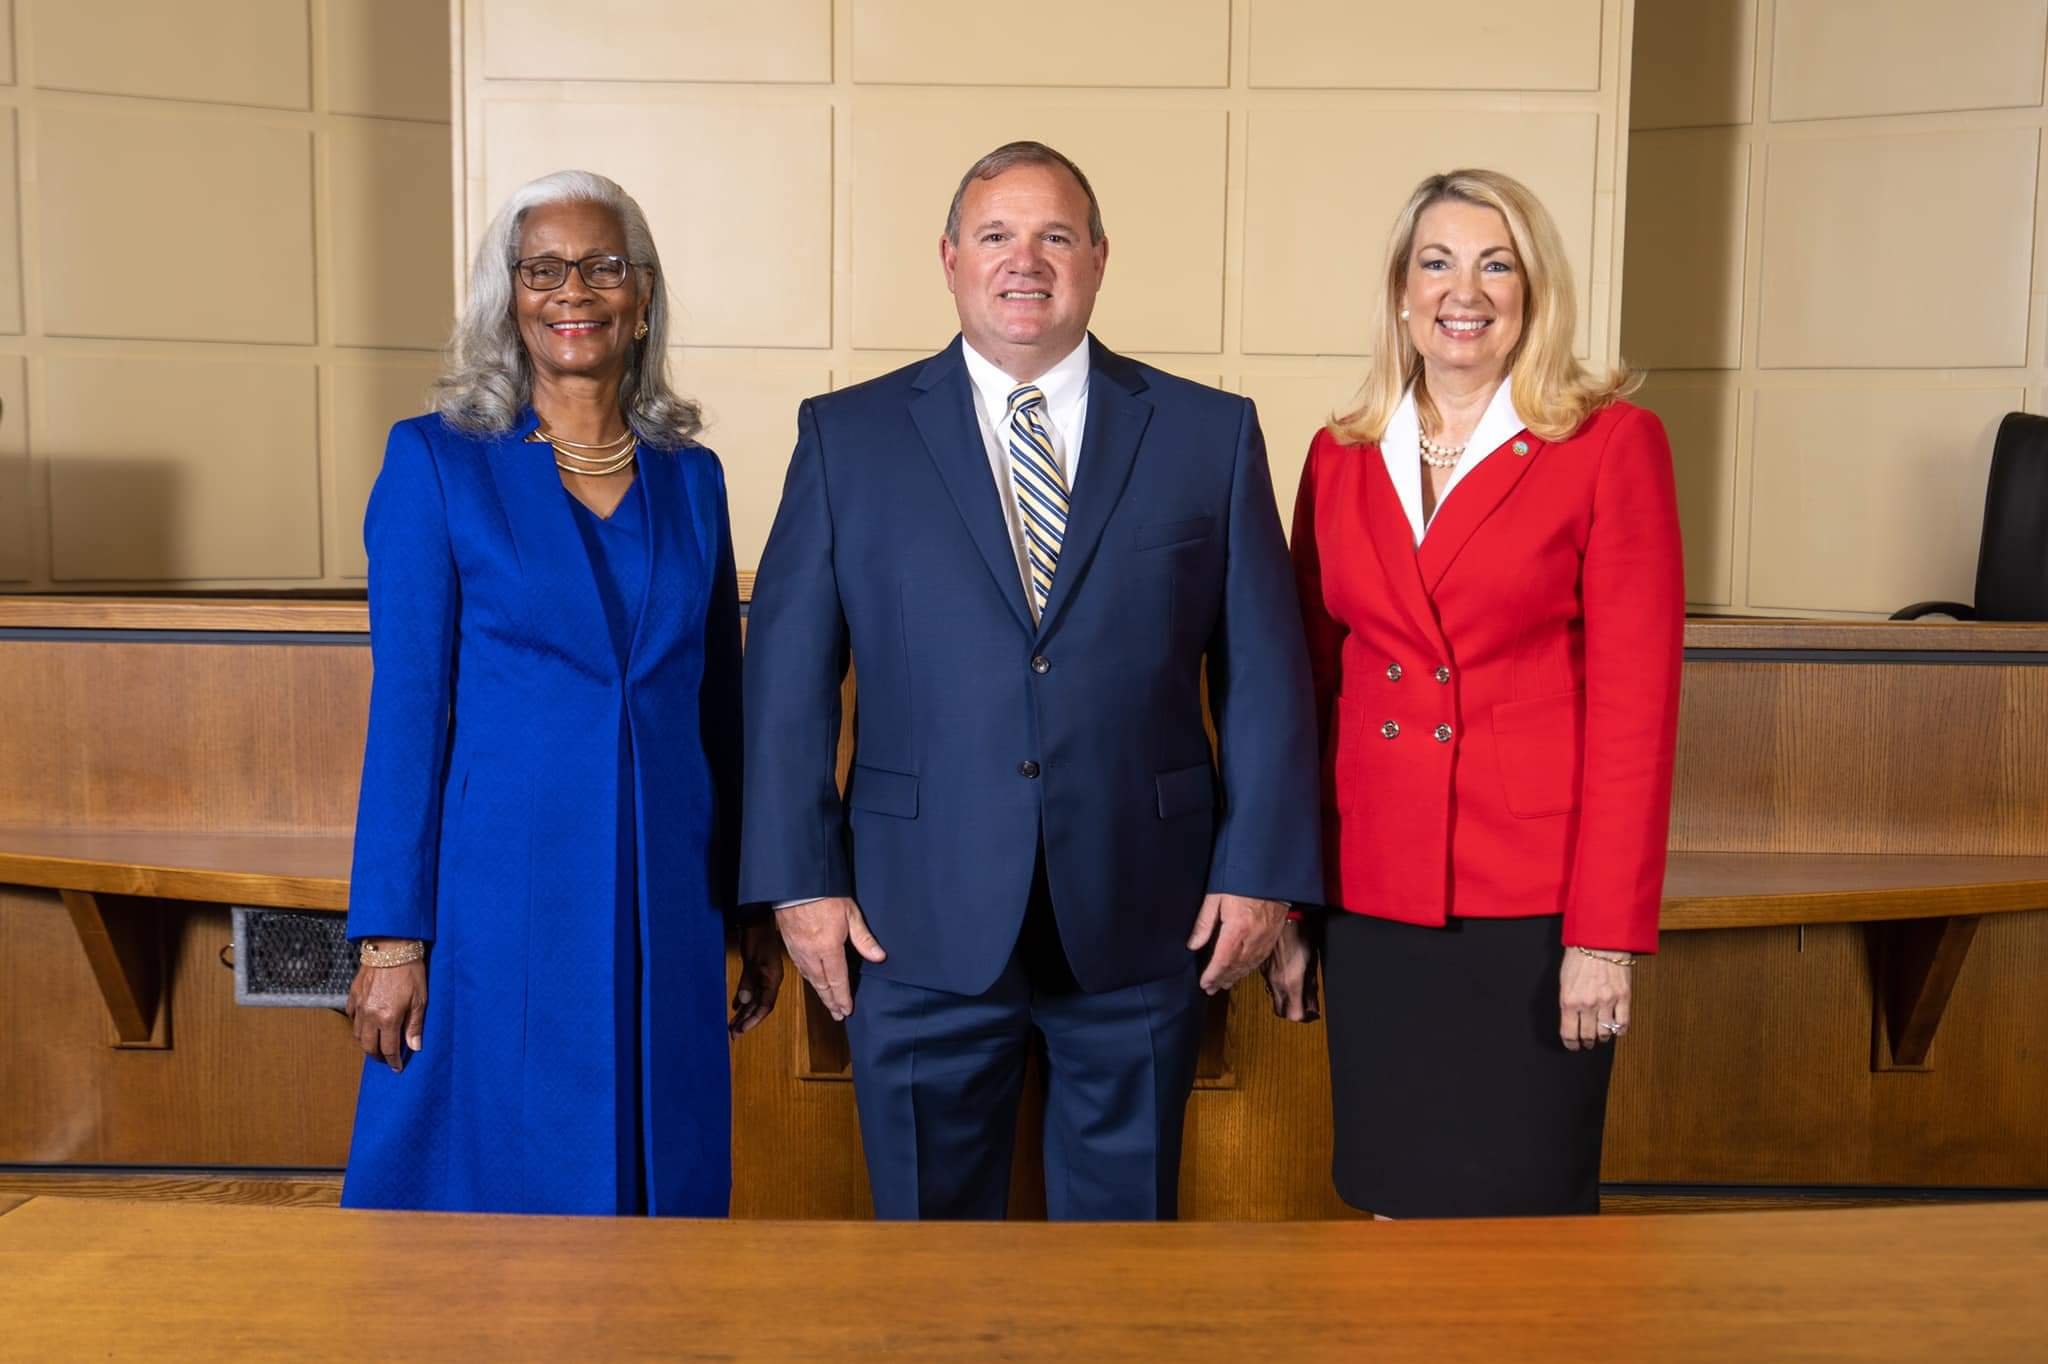 Mobile County Commissioners Merceria Ludgood, Randall Dueitt, and Connie Hudson